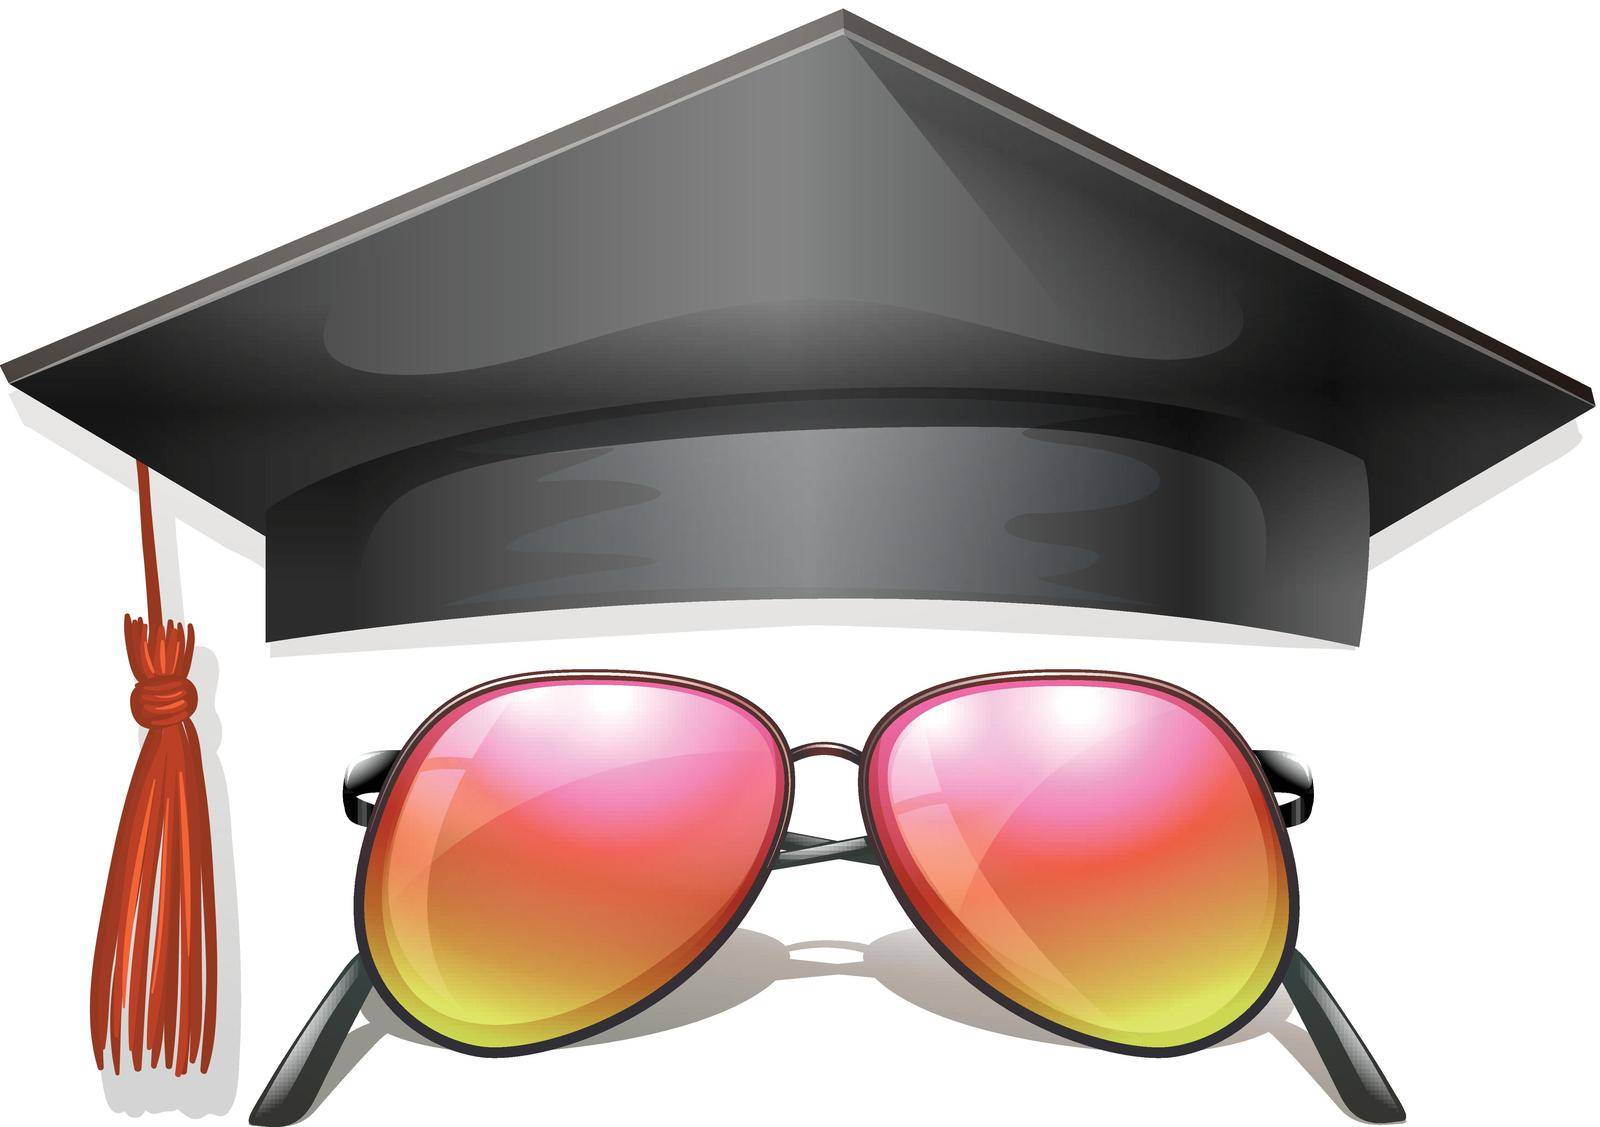 Graduation cap and sunglasses by iimages